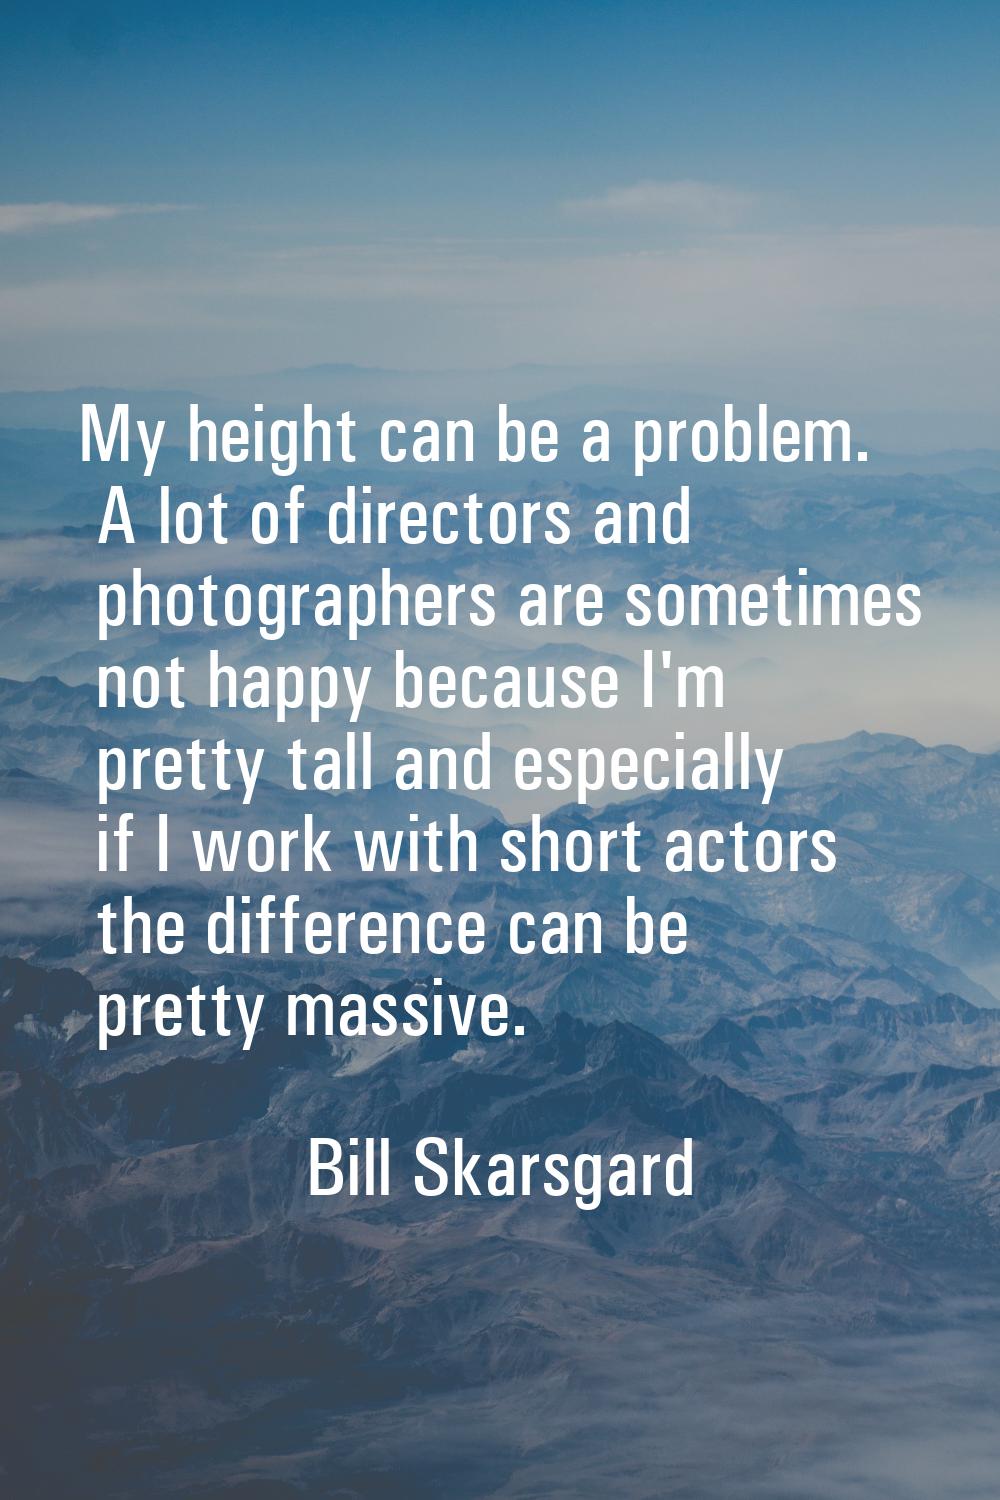 My height can be a problem. A lot of directors and photographers are sometimes not happy because I'